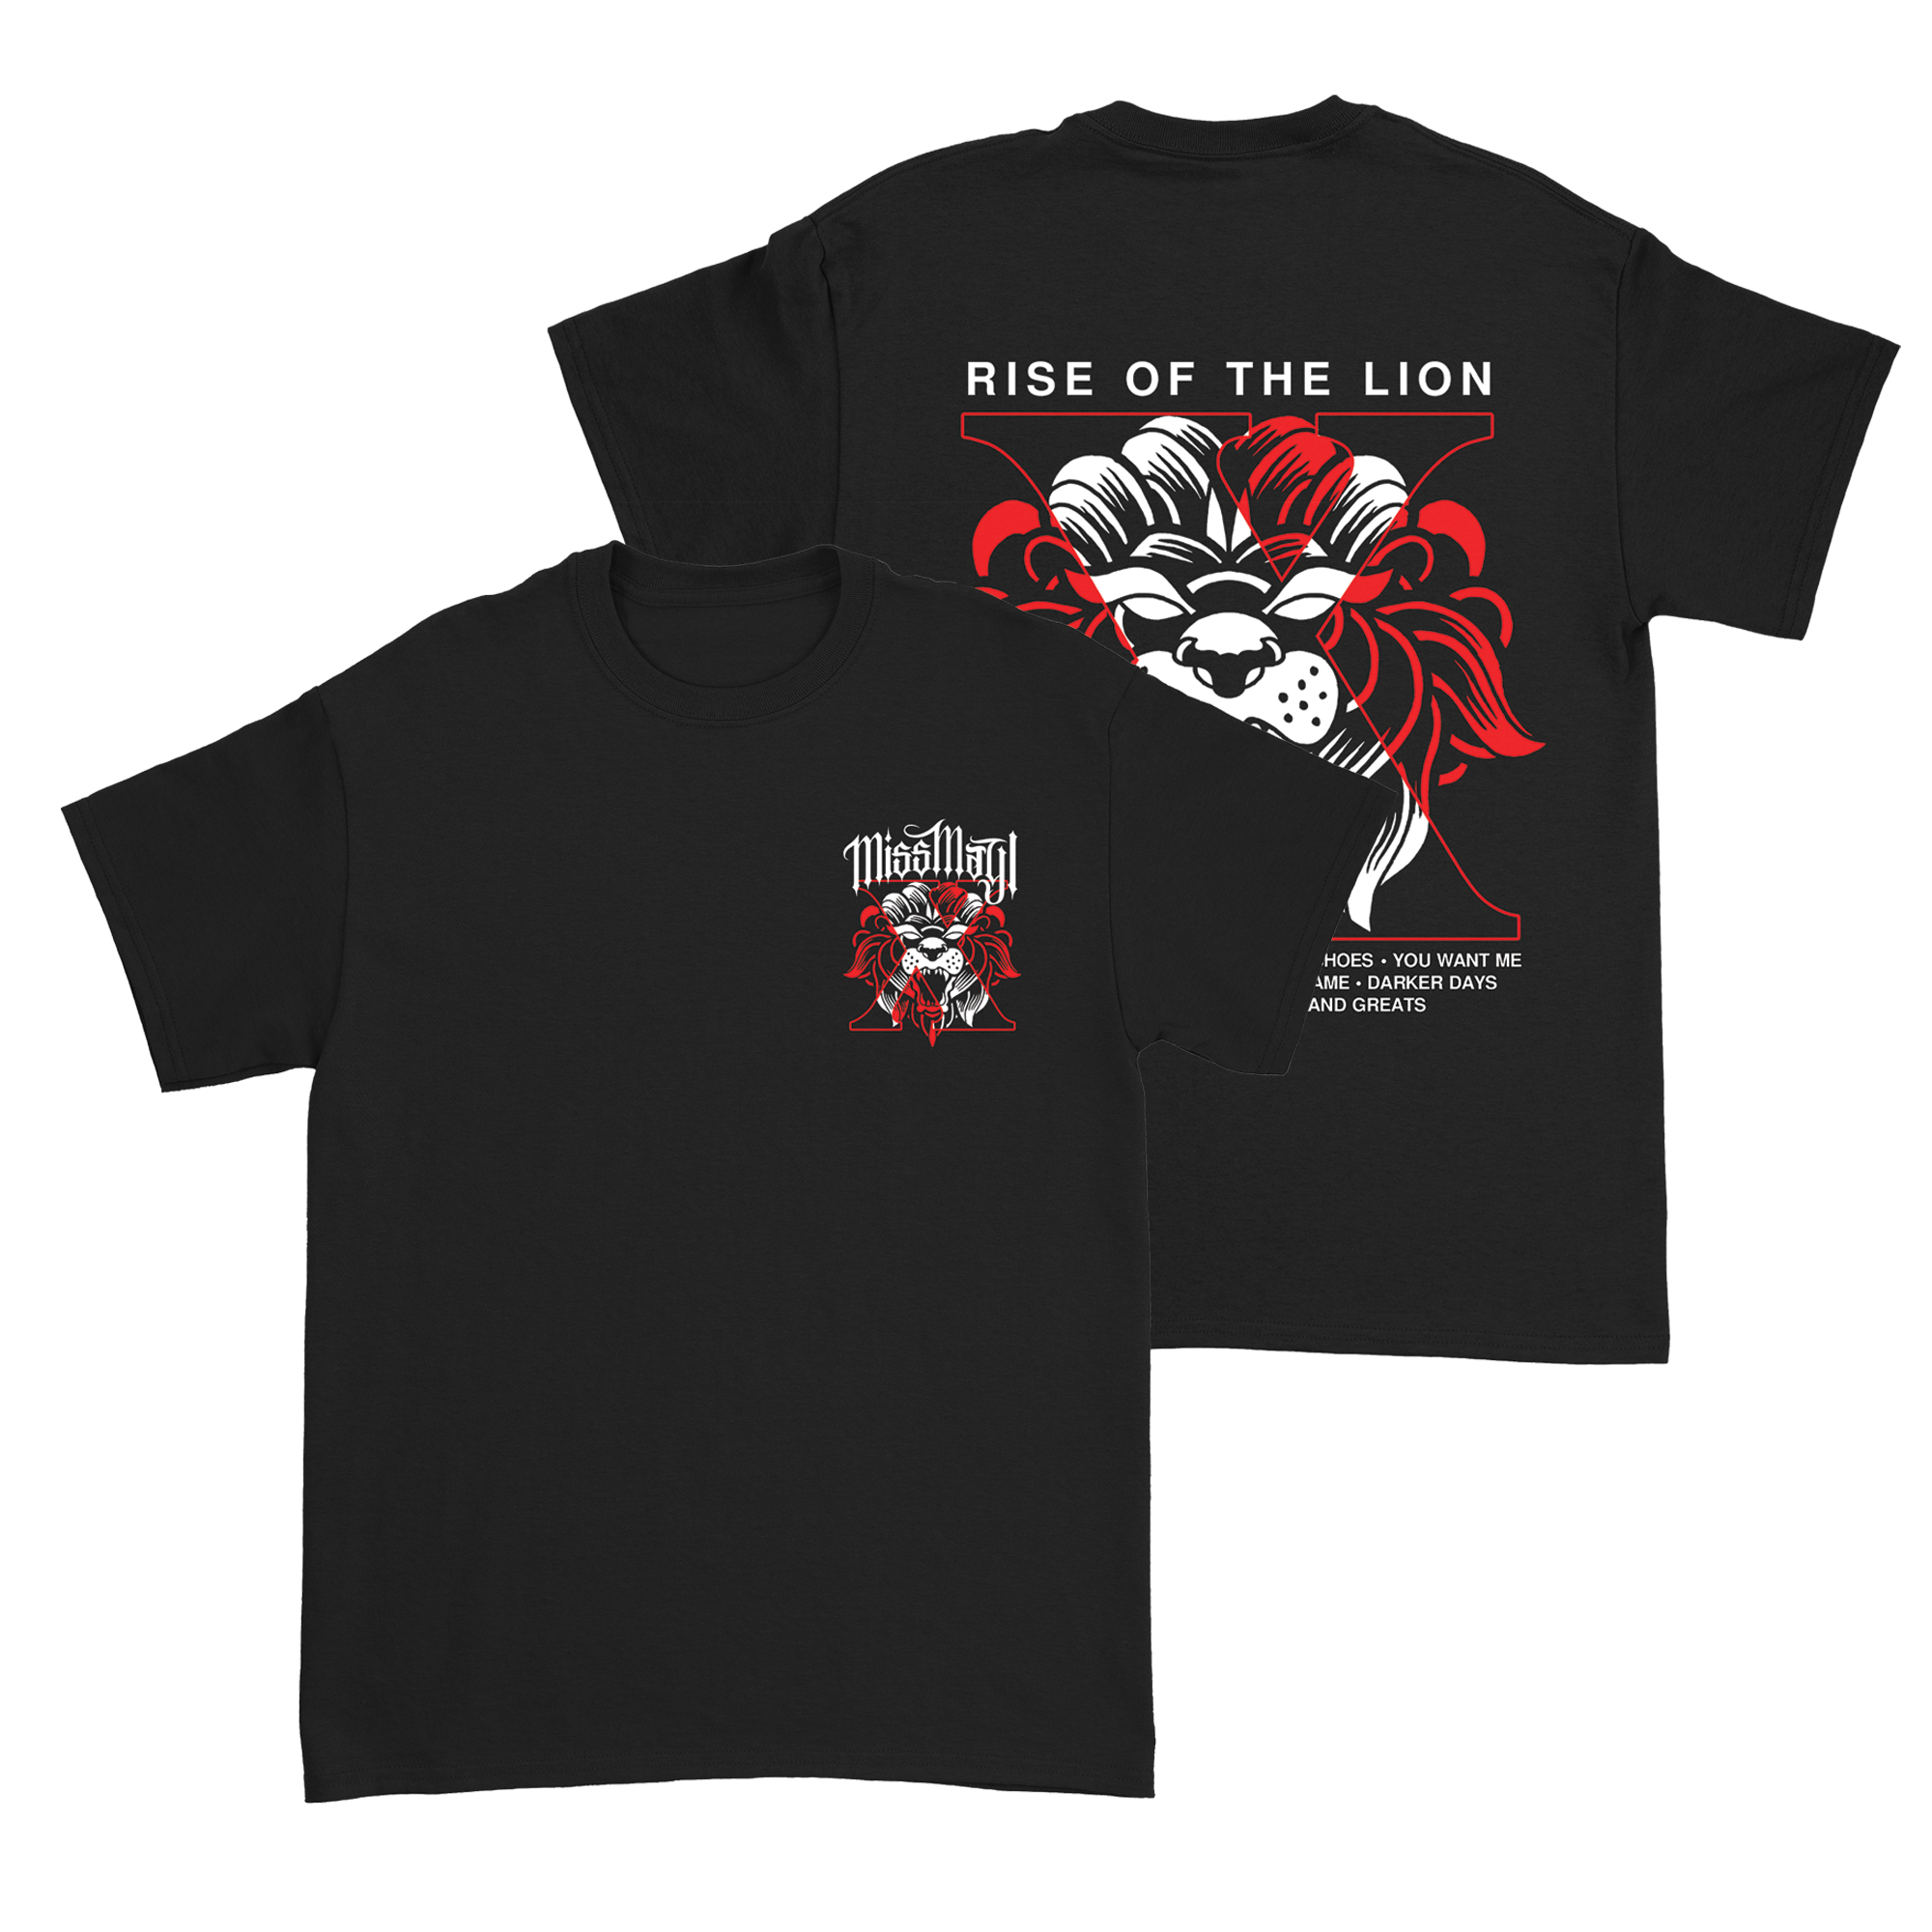 Miss May I - Rise of the Lion T-Shirt